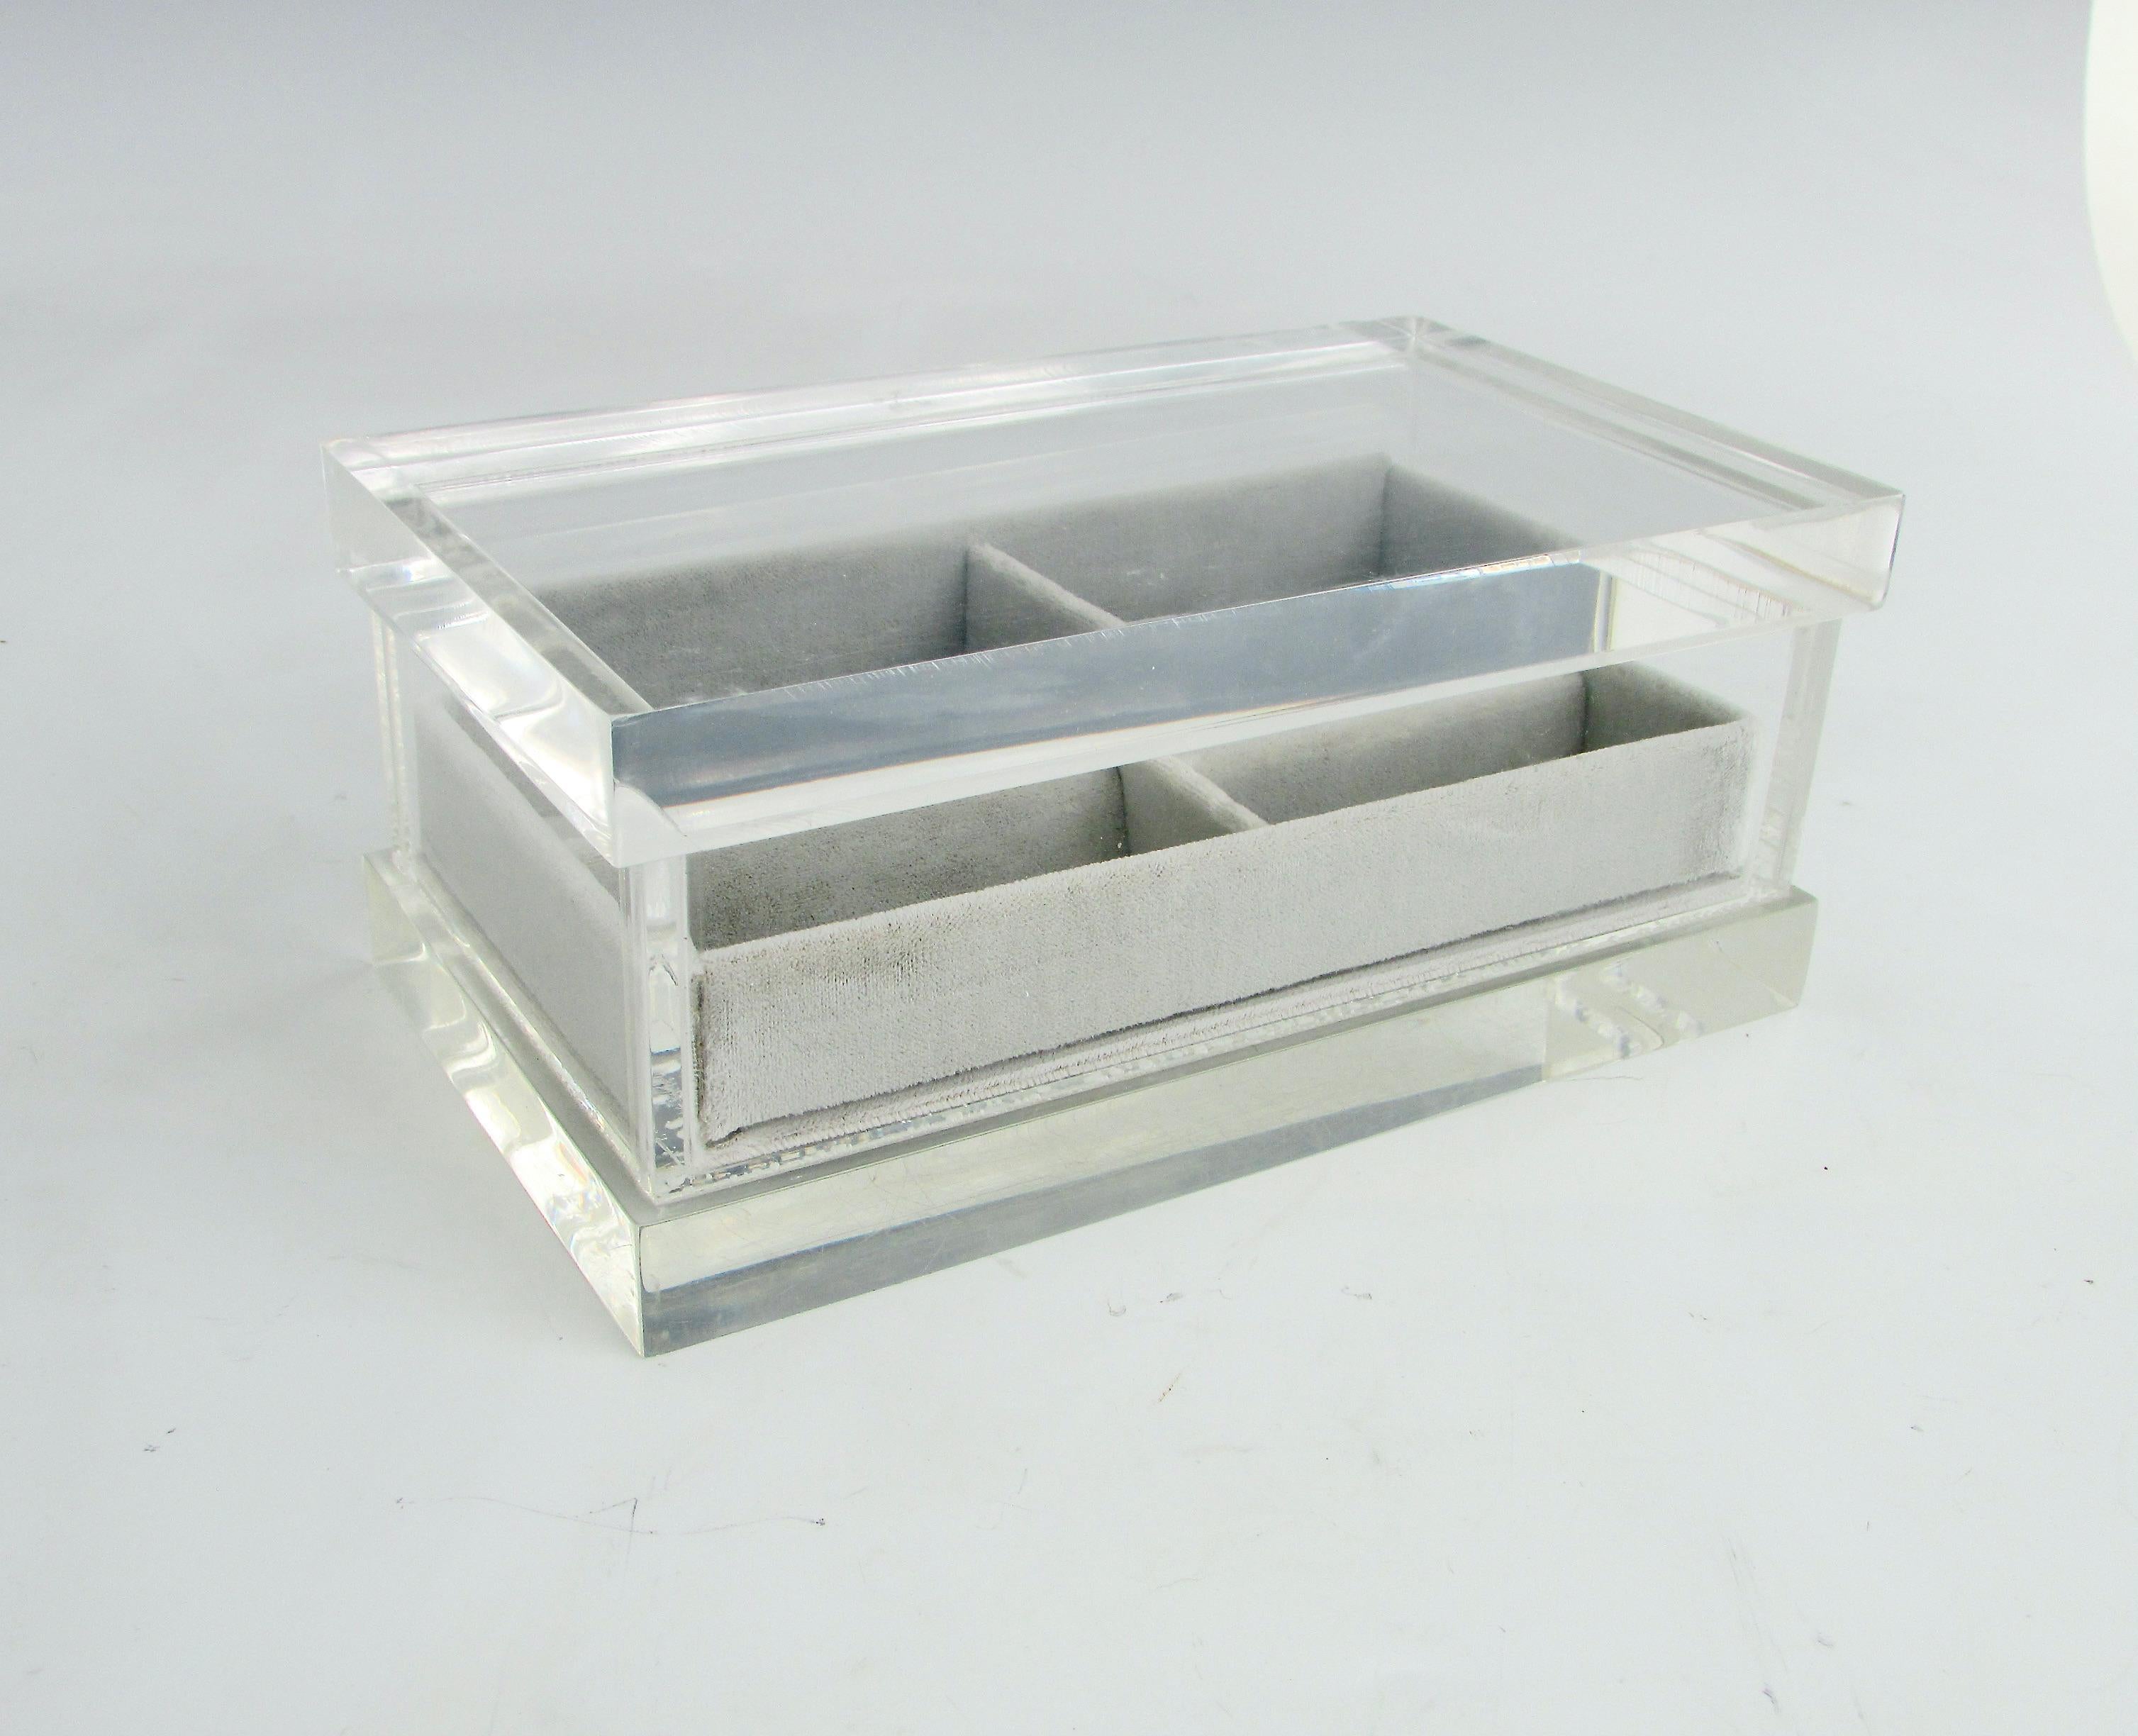 Dresser Top Lucite Jewelry Box with Fitted Lid In Good Condition For Sale In Ferndale, MI